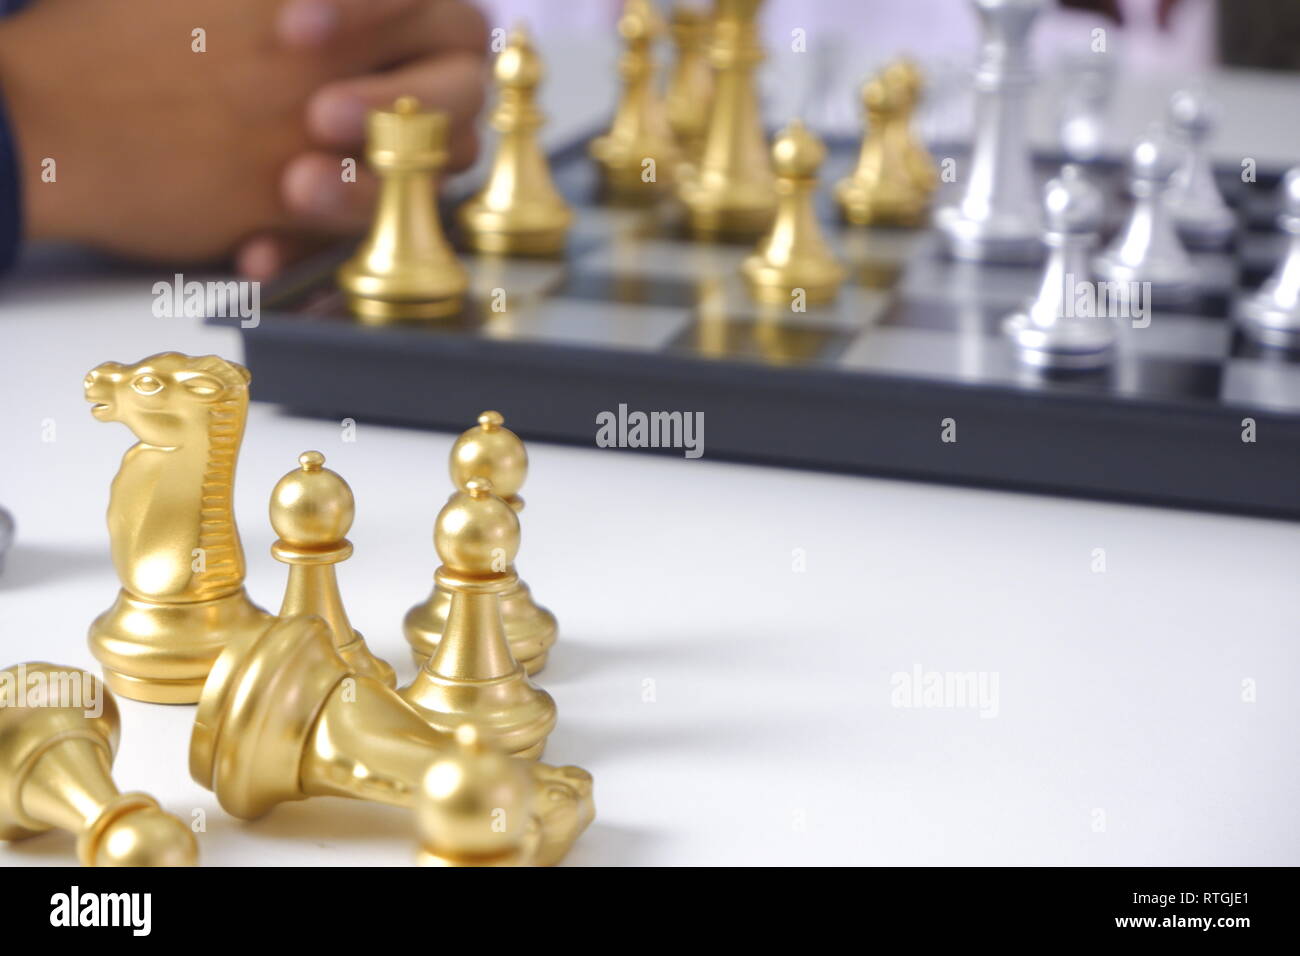 Businessman playing chess game; business strategy, leadership and management concept. Stock Photo